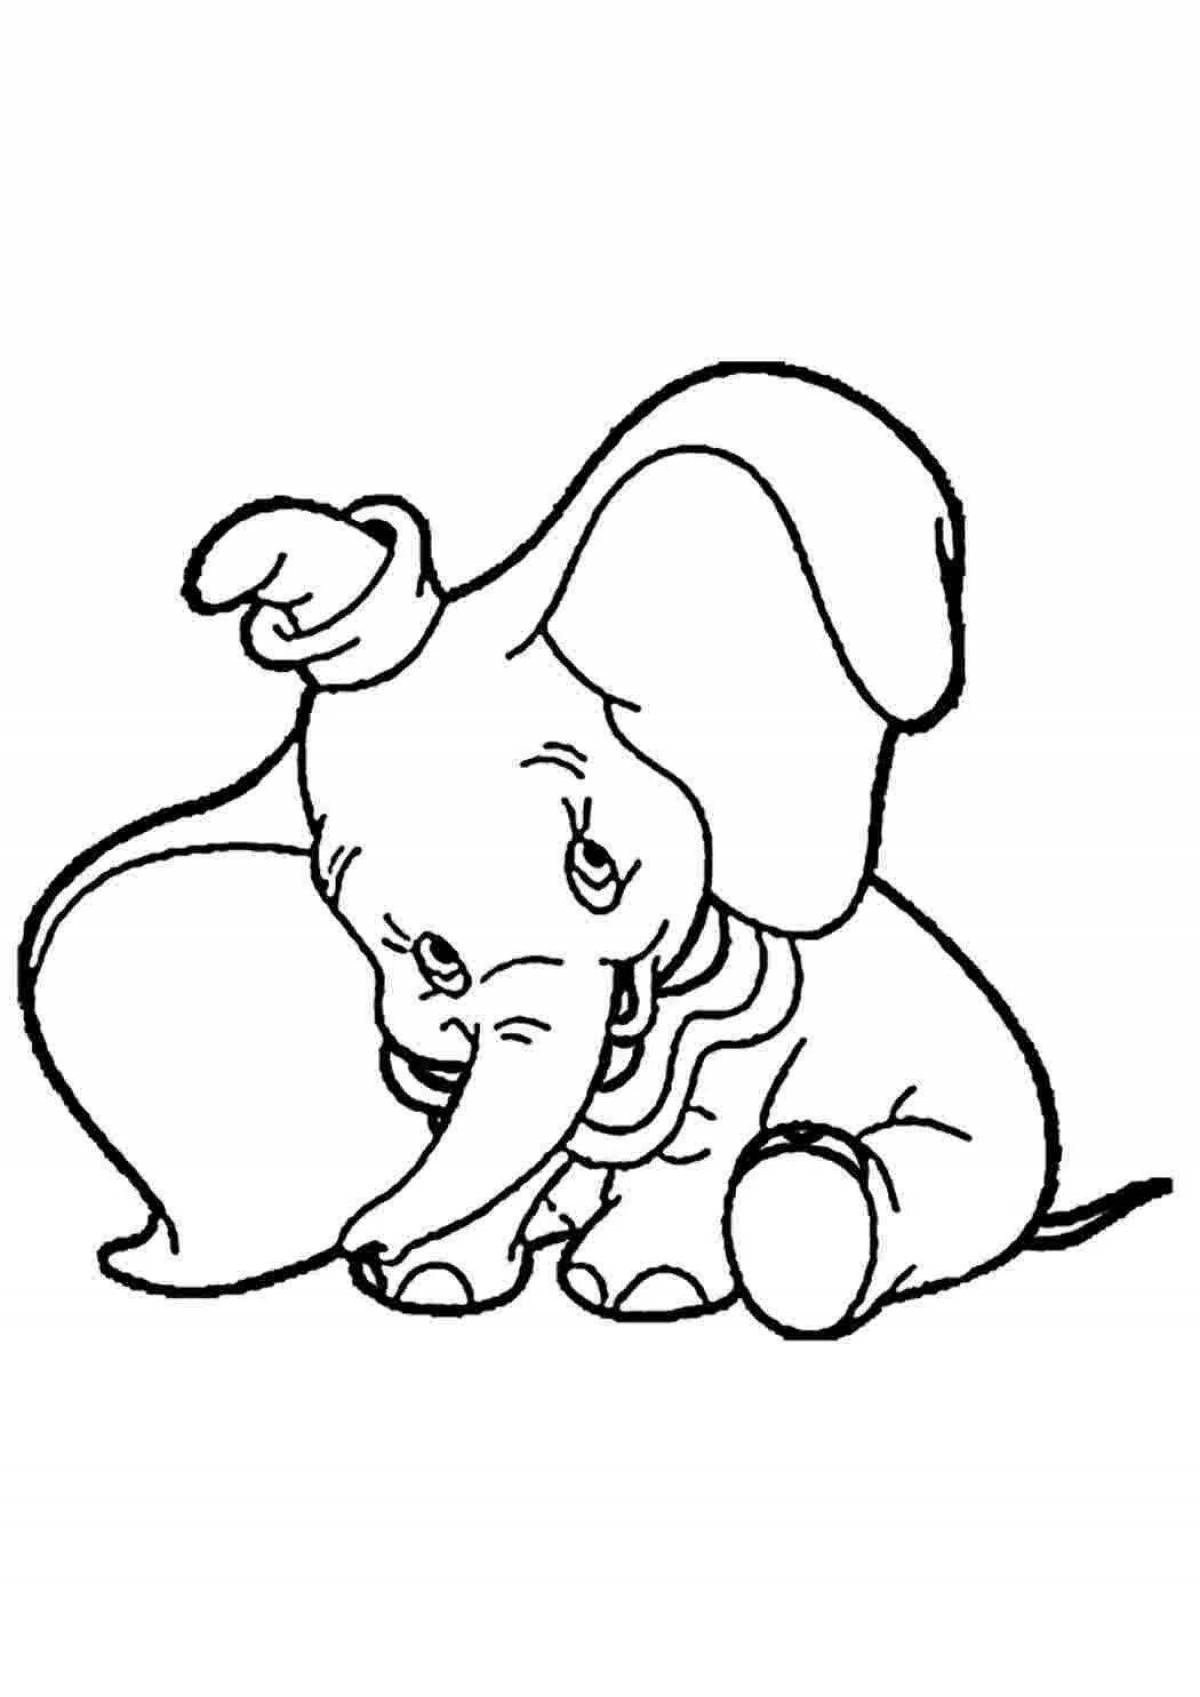 Funny elephant coloring book for 3-4 year olds